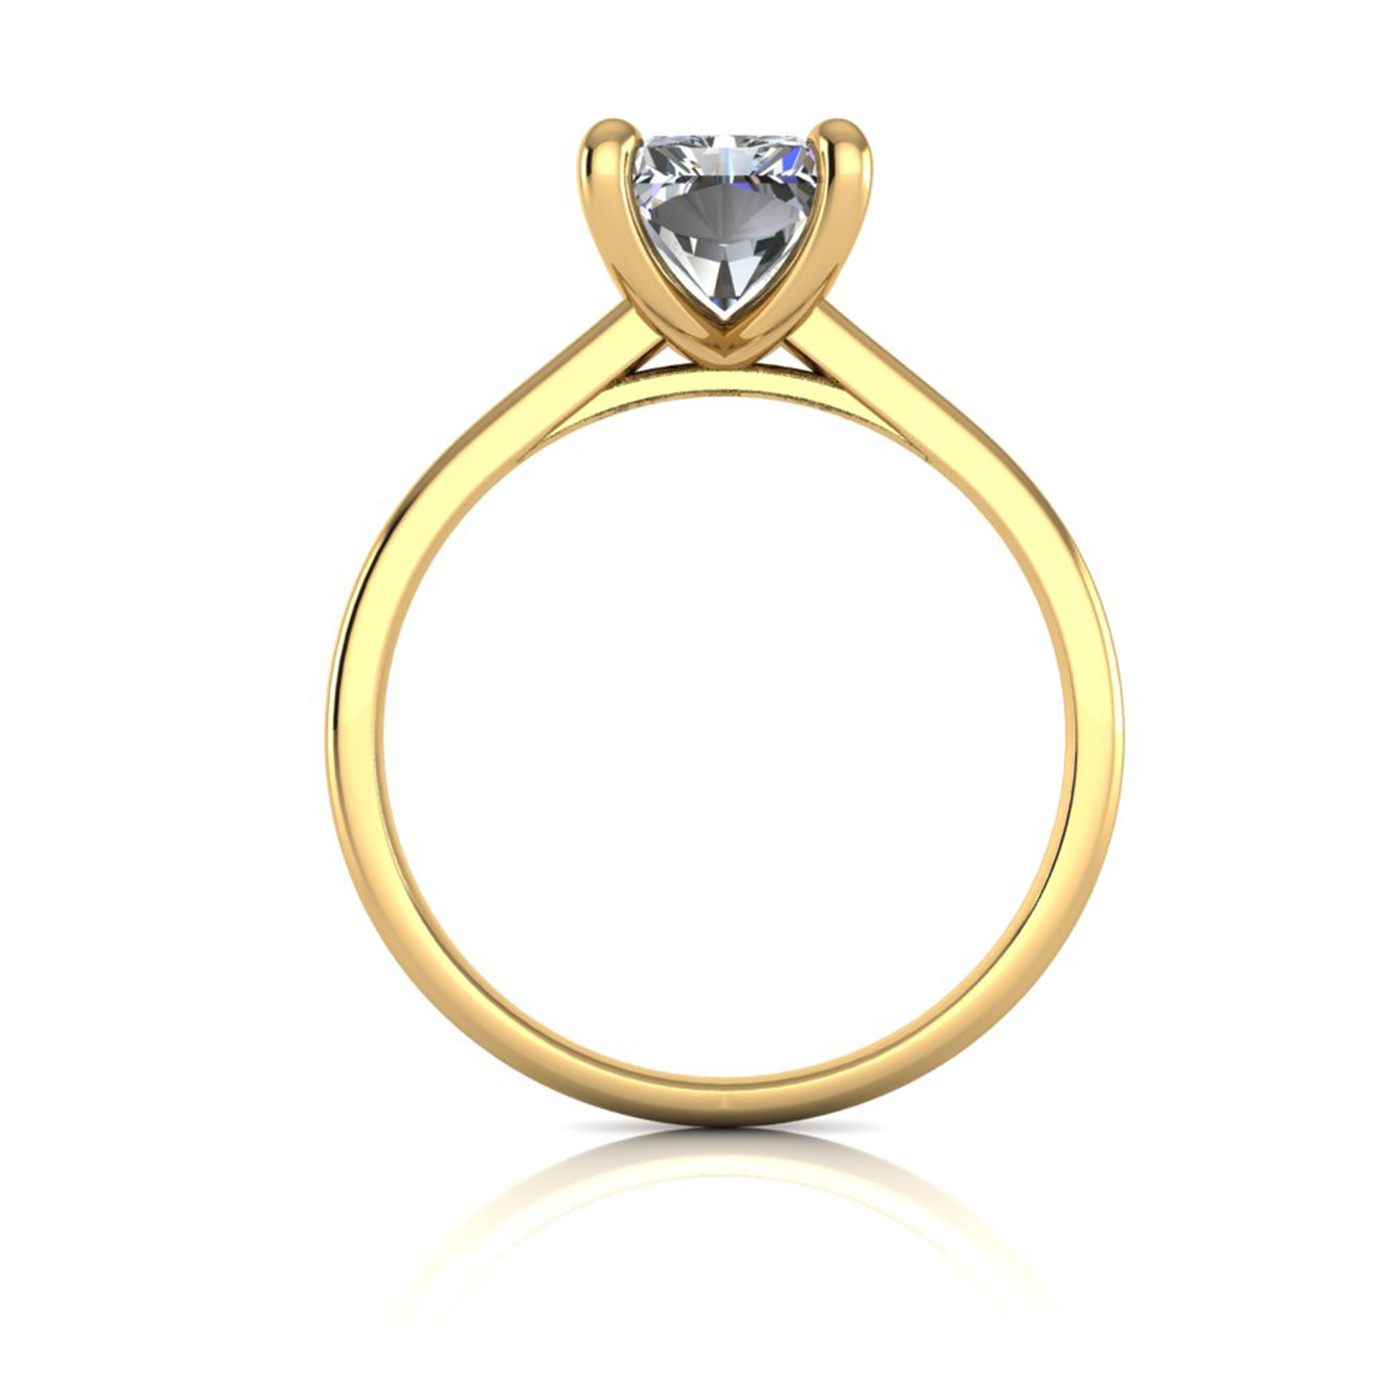 18k yellow gold  2,00 ct 4 prongs solitaire radiant cut diamond engagement ring with whisper thin band